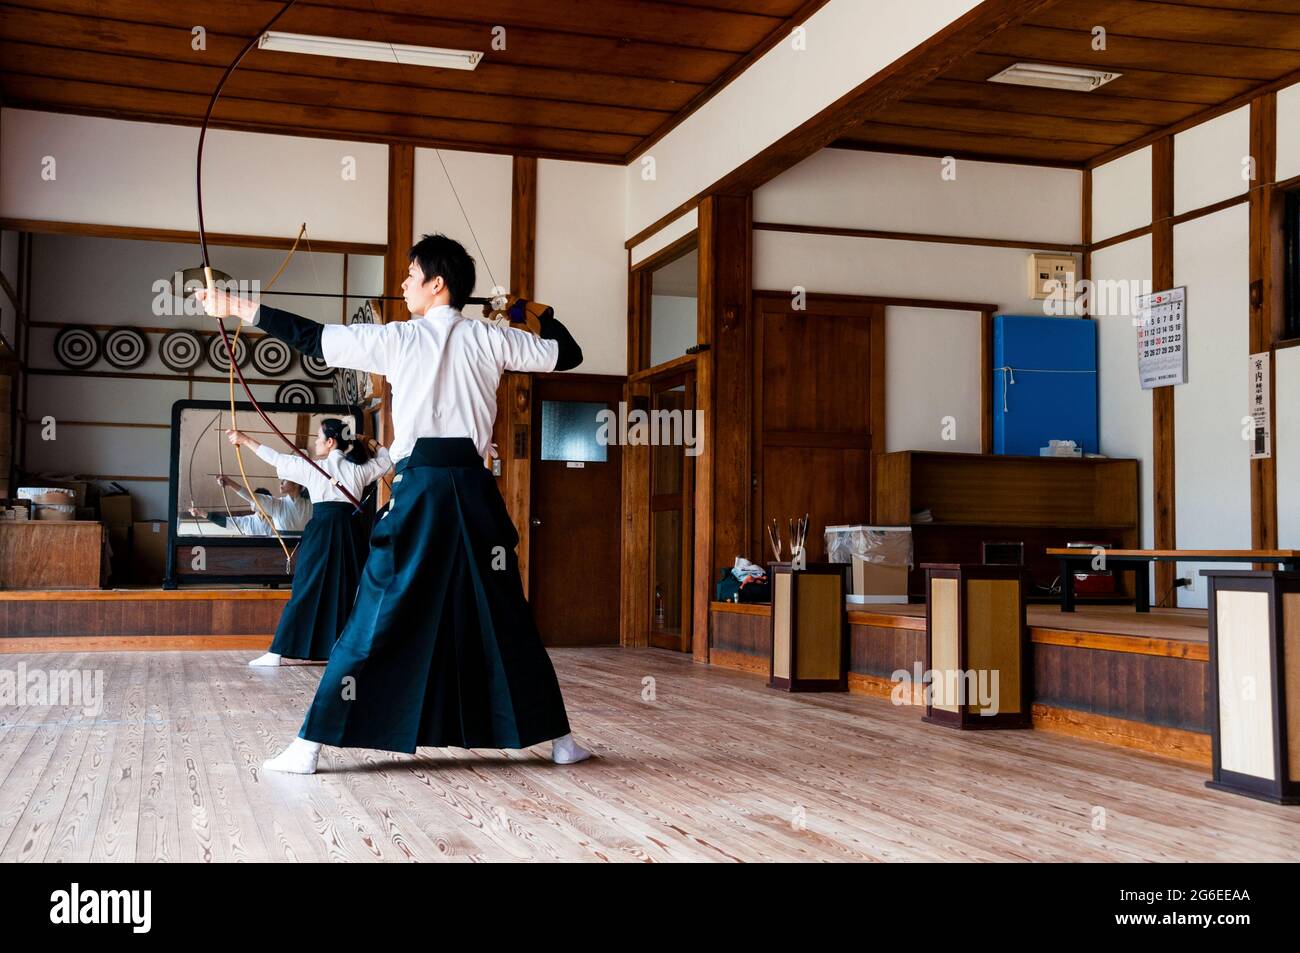 Japanese longbow archery closely associated with Zen Buddhism in Tokyo, Japan. Stock Photo